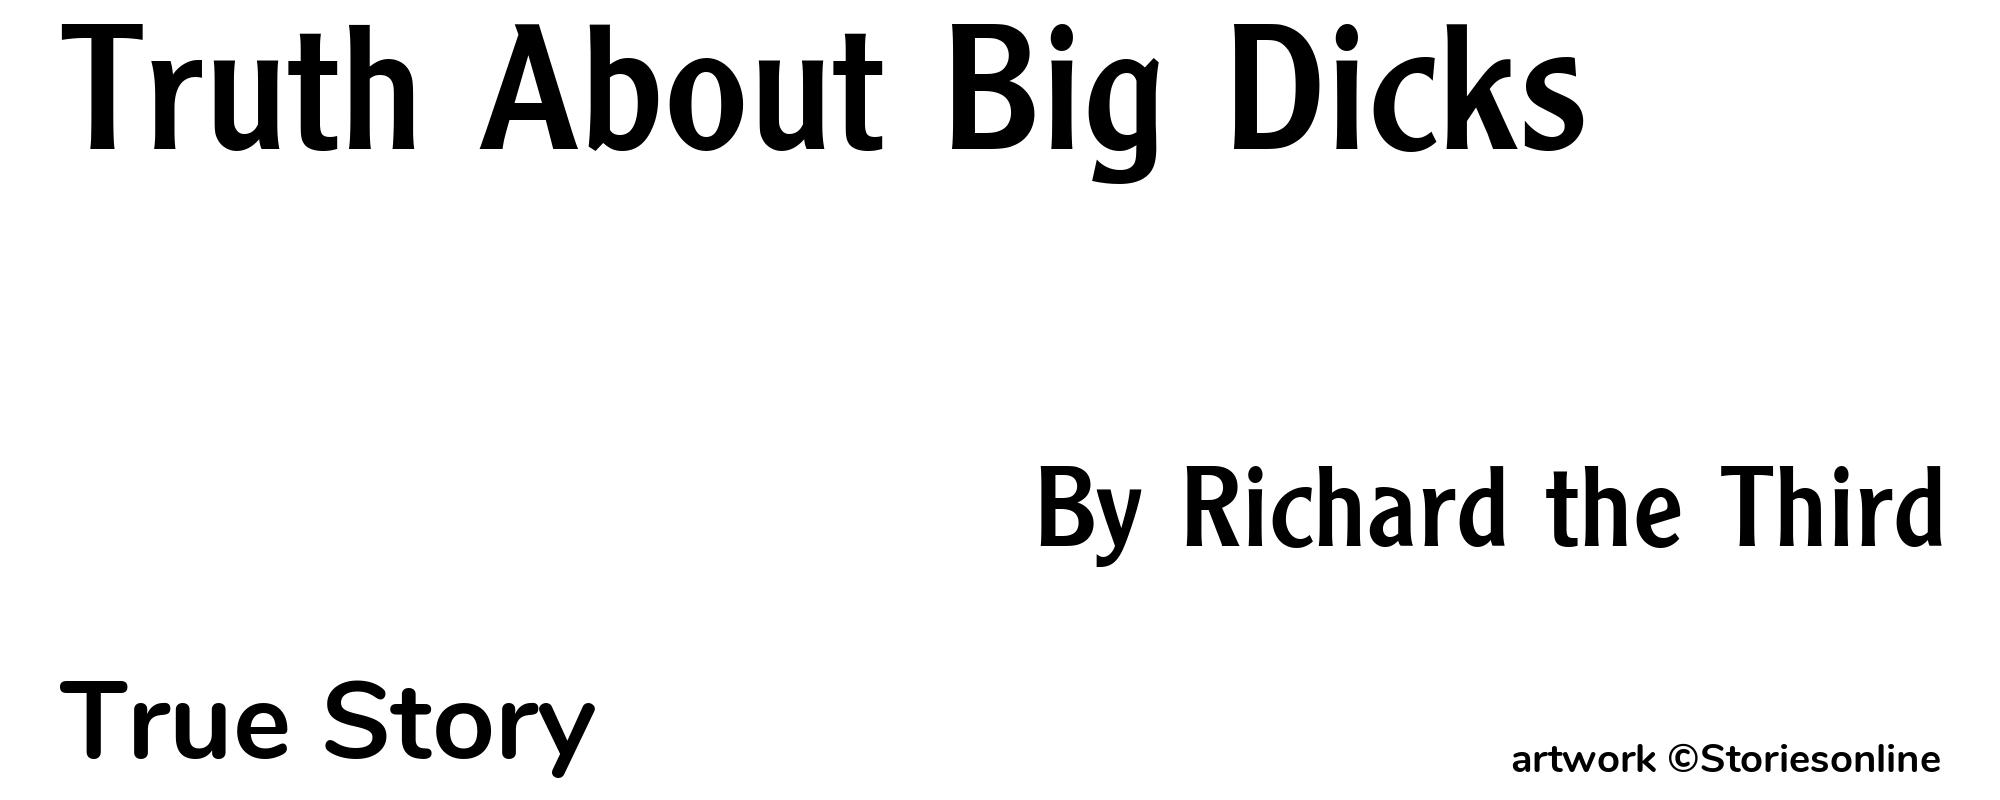 Truth About Big Dicks - Cover